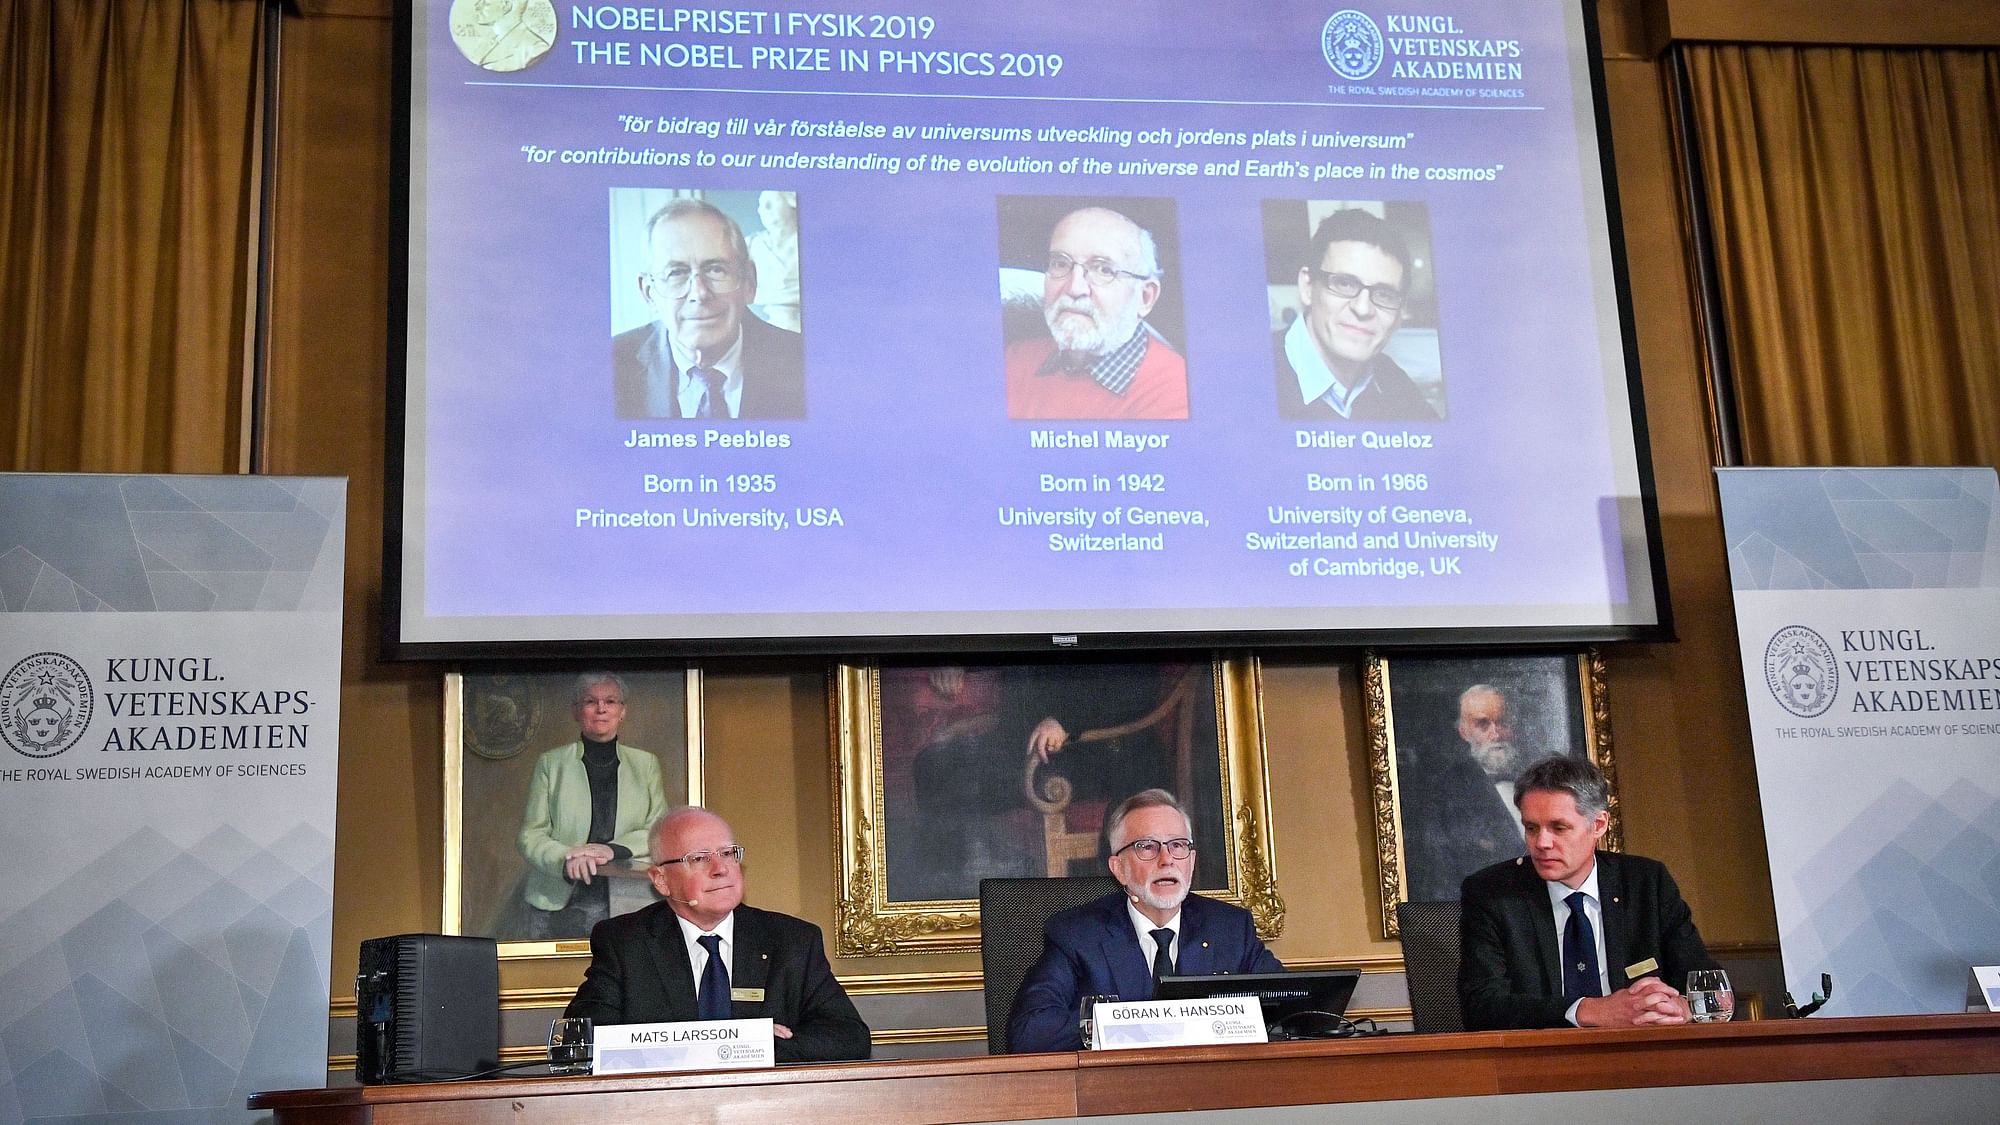 Goran K Hansson, secretary general of the Royal Swedish Academy of Sciences, and academy members Mats Larsson and Ulf Danielsson, announce the winners of the 2019 Nobel Prize in Physics.&nbsp;